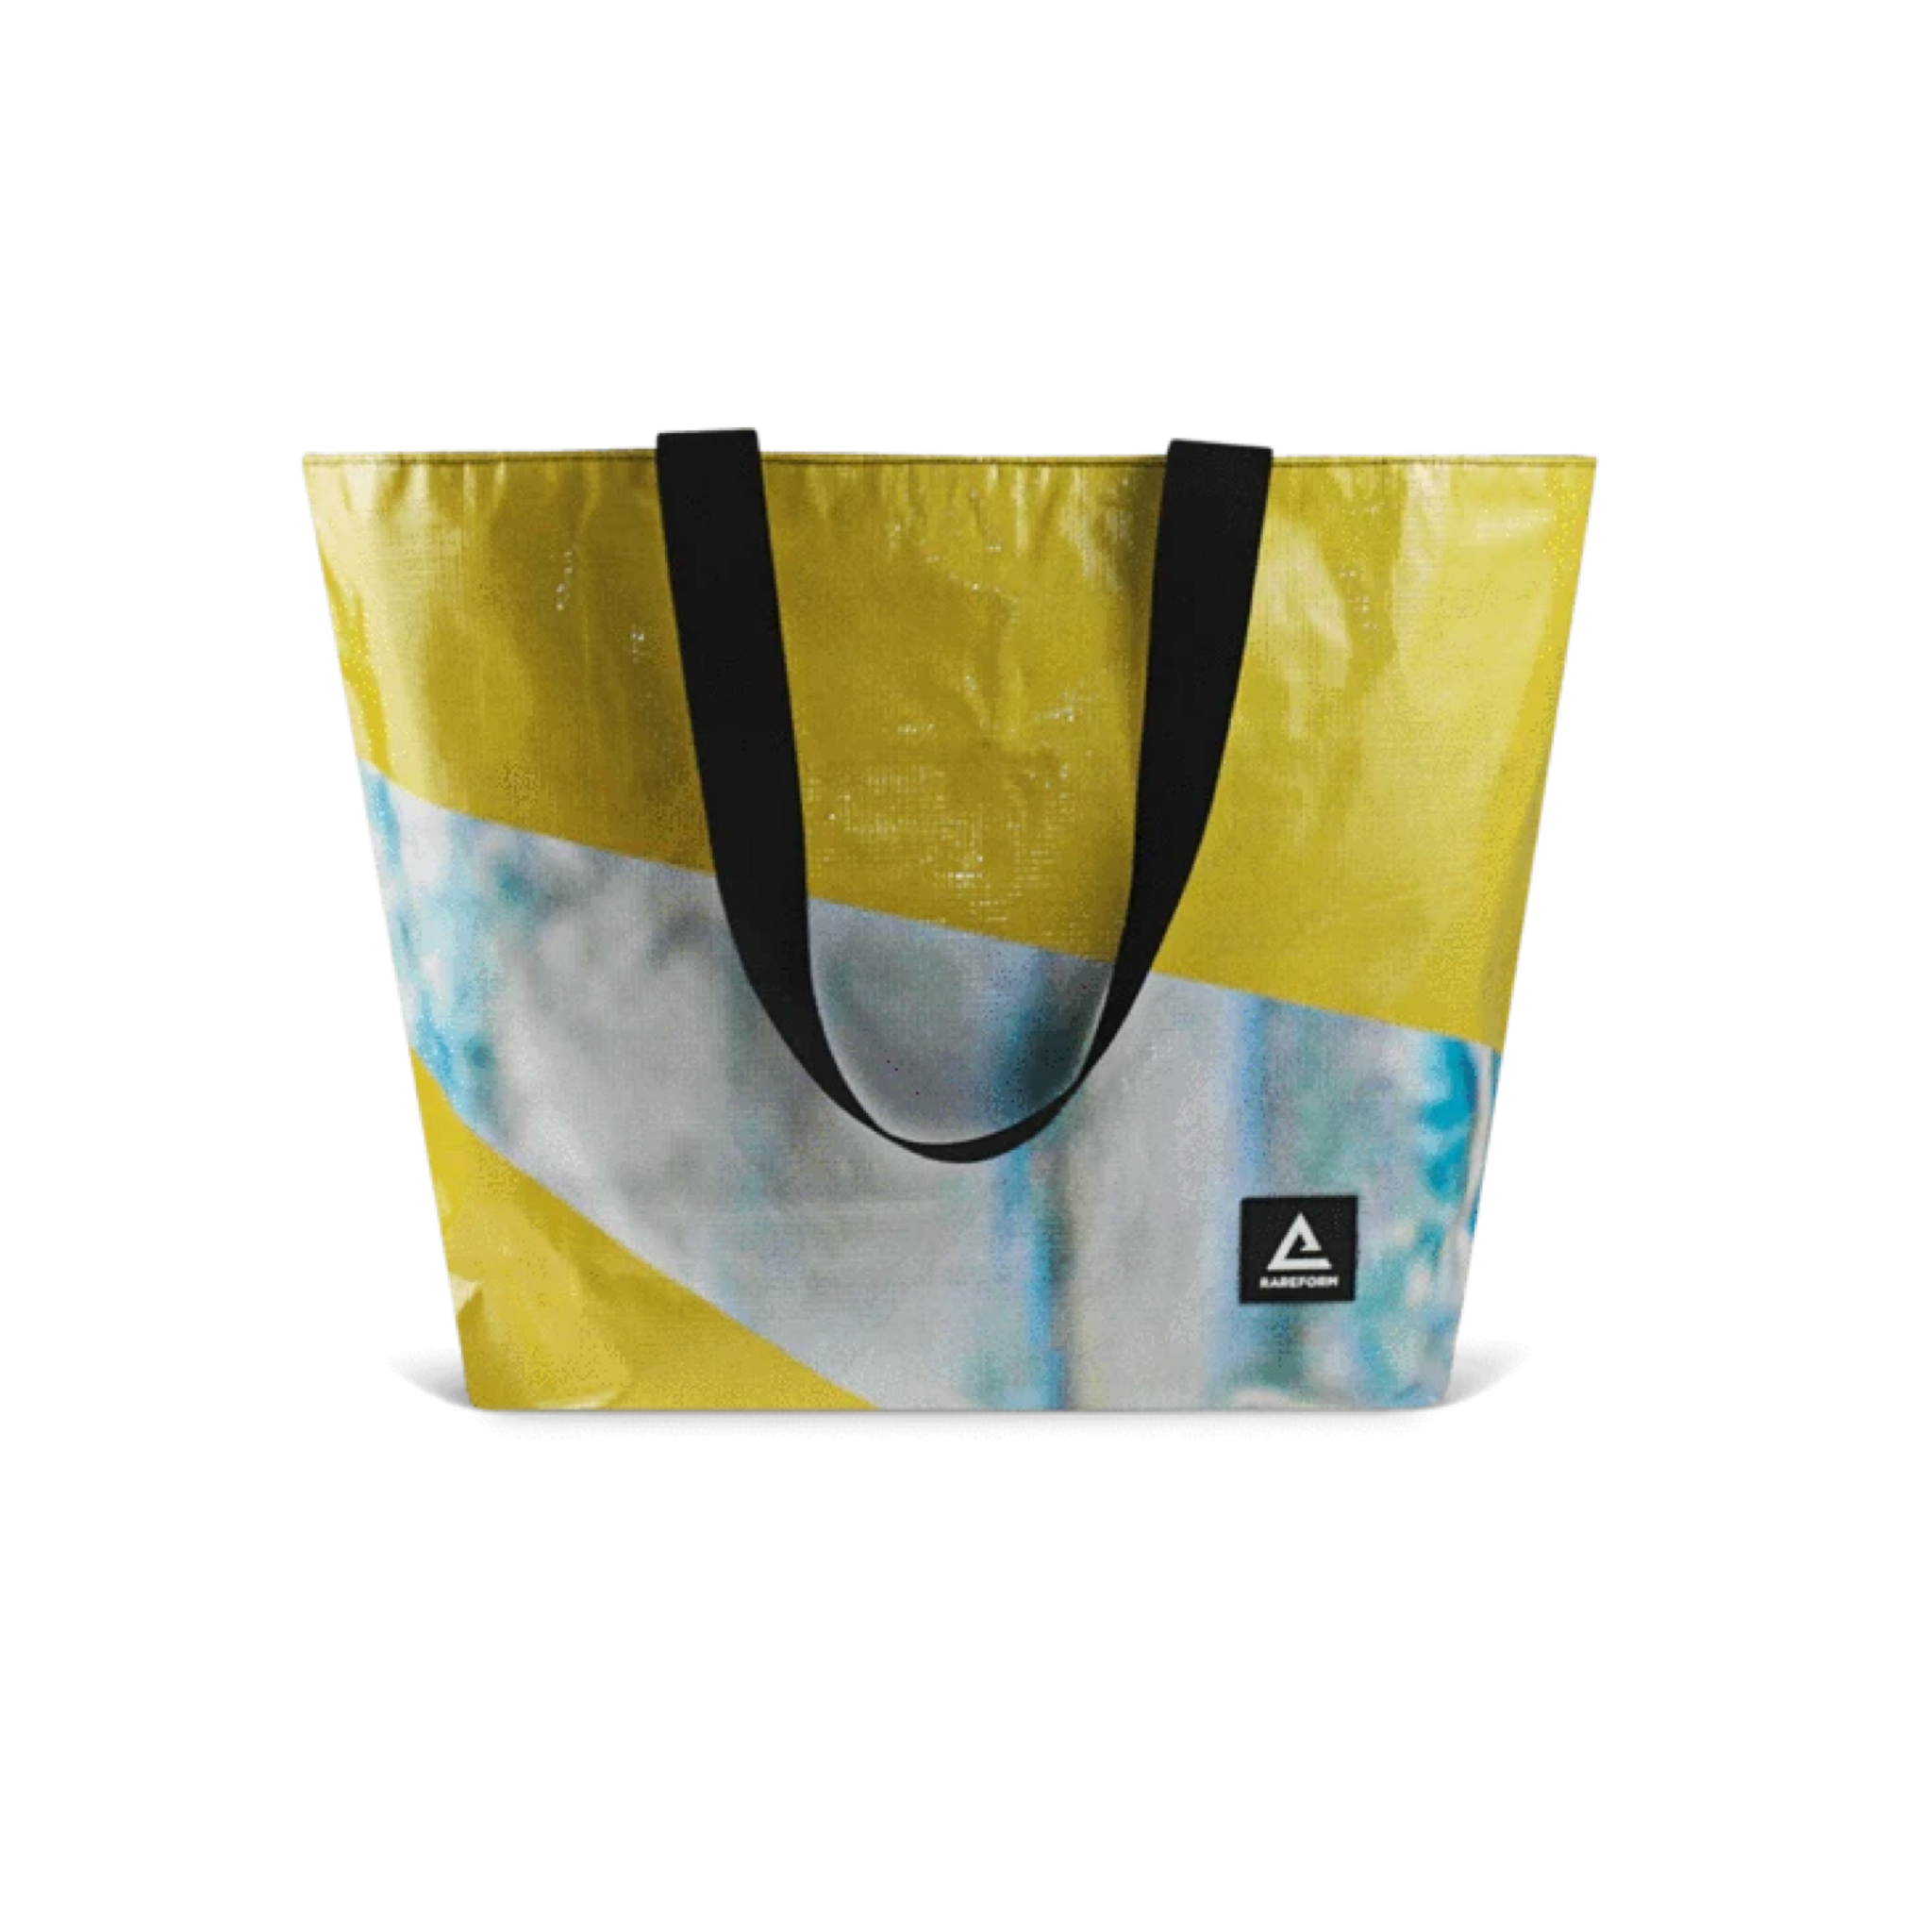 Tote bag Vinyle – Cool and the bag